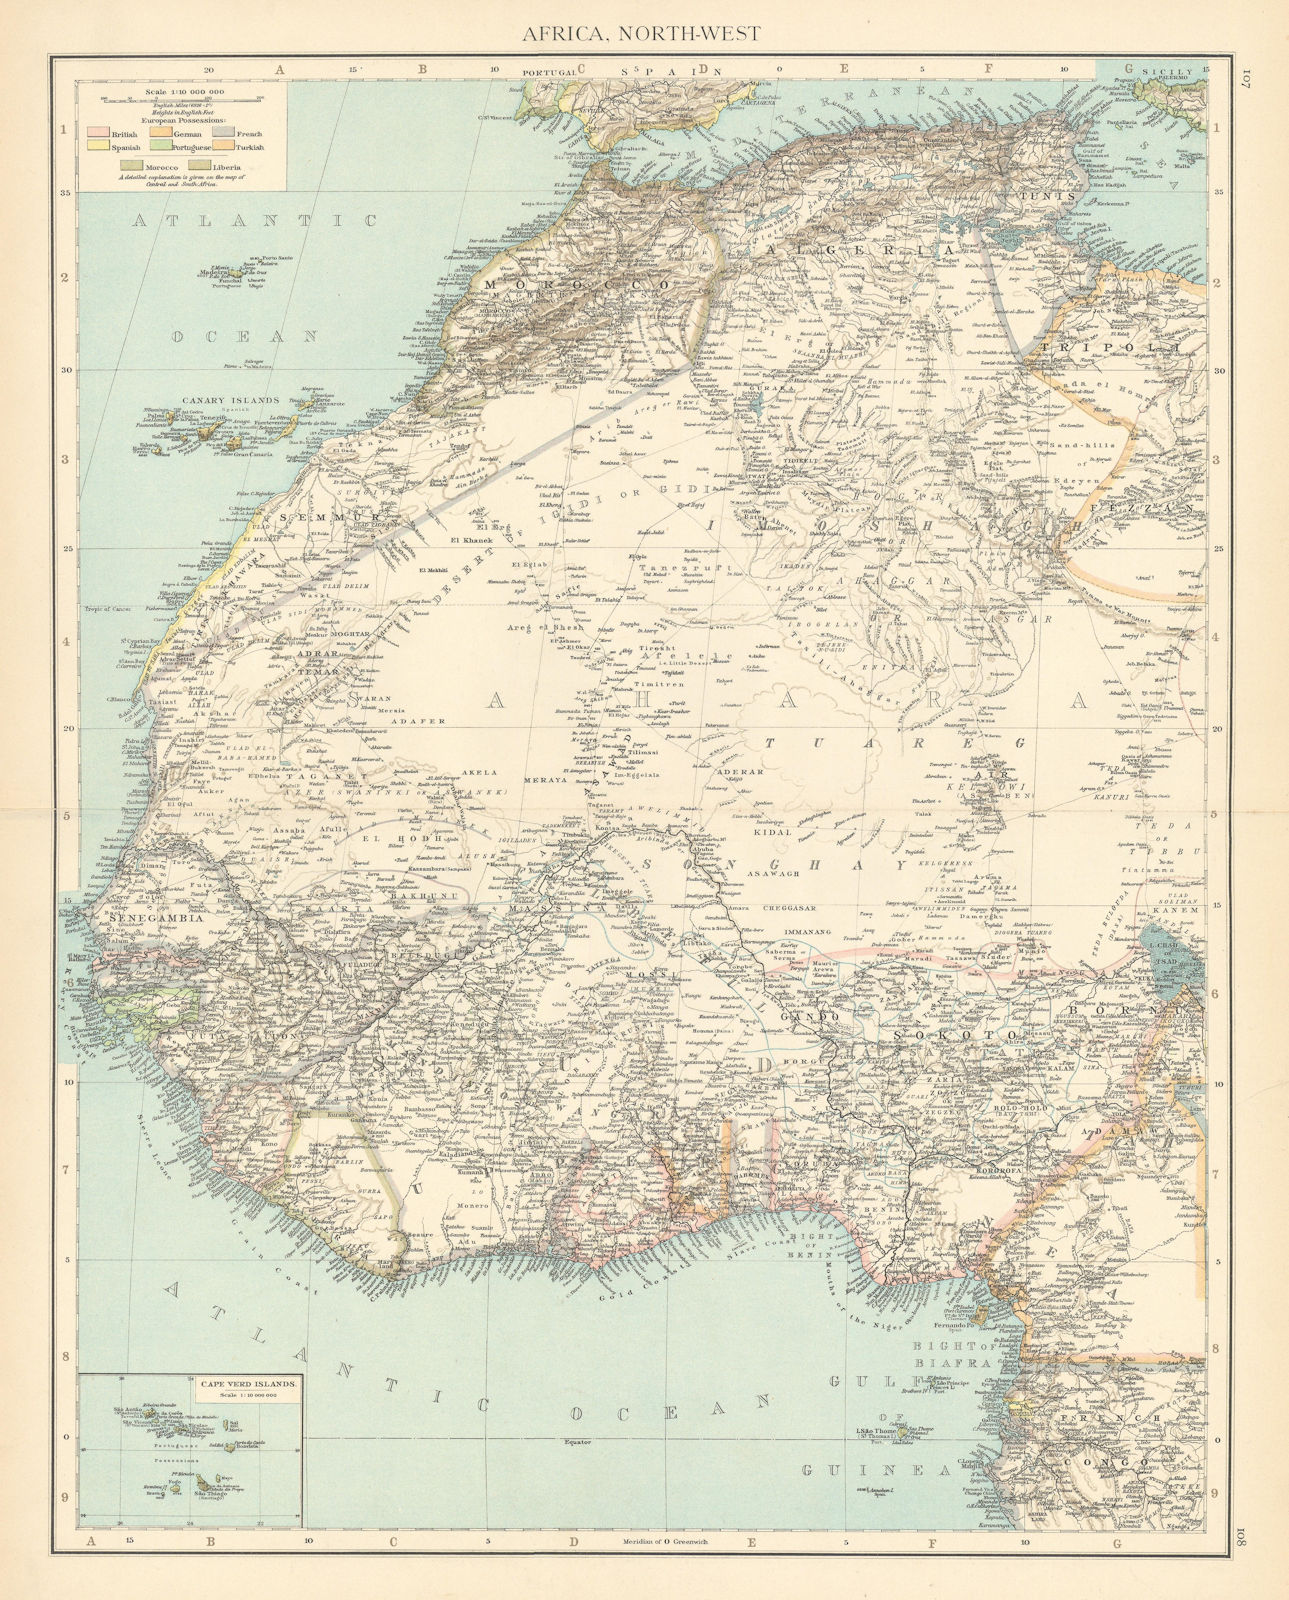 Colonial Africa North-West. British French. Nigeria Sahara. THE TIMES 1895 map